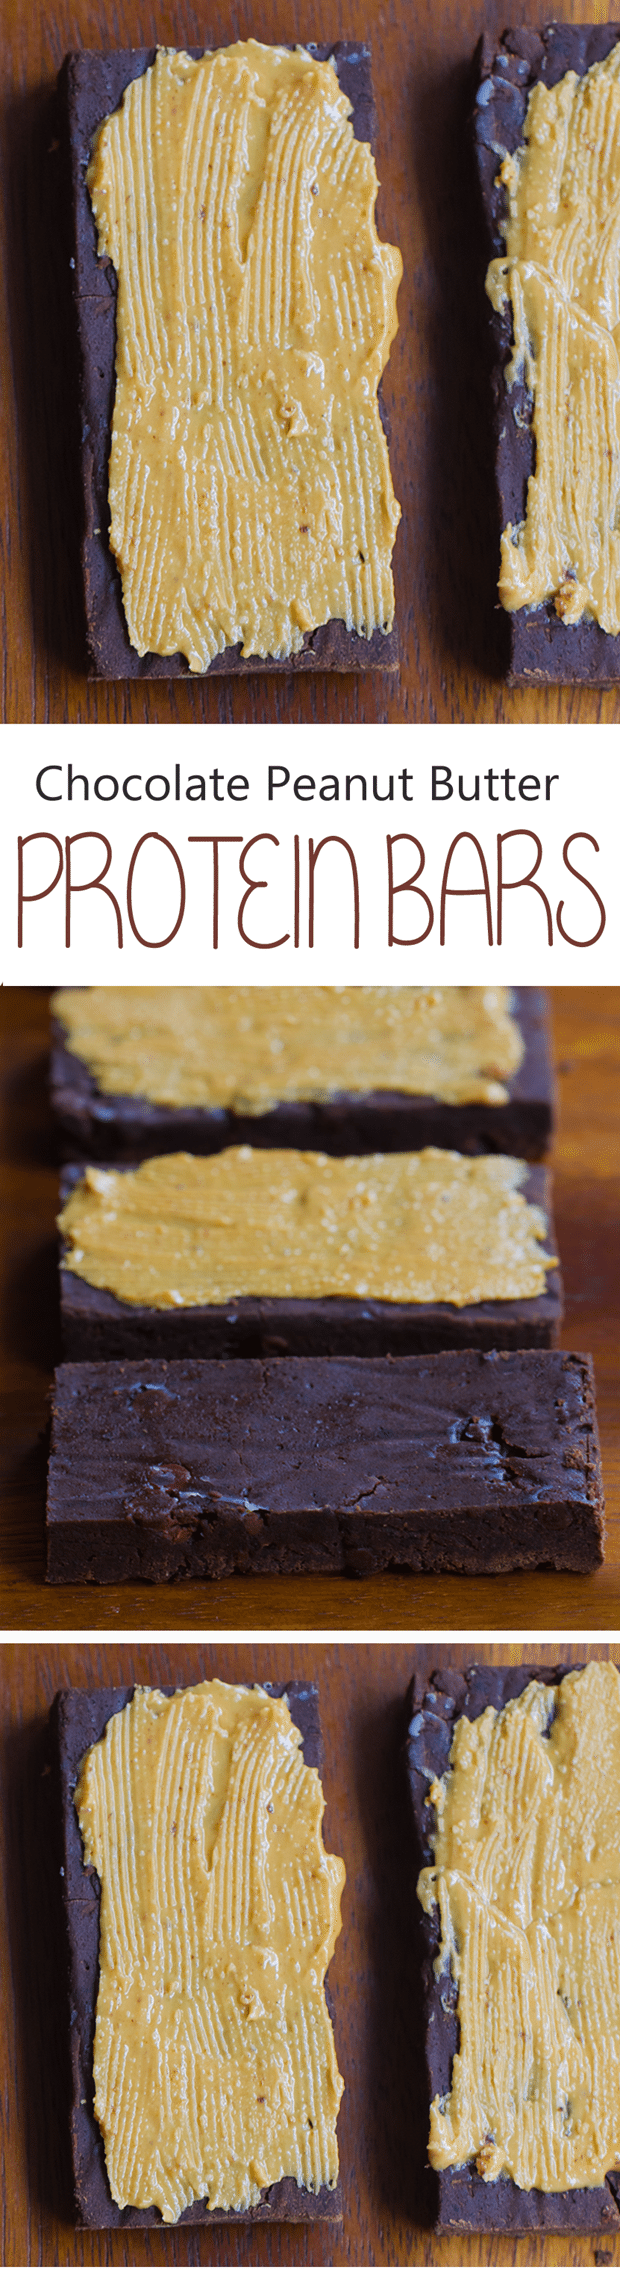 NO flour, NO refined sugar chocolate protein bars - tastes like eating a Reeses Peanut Butter Cup... but GOOD for you!!! - https://chocolatecoveredkatie.com/2016/01/06/homemade-protein-bars-chocolate-peanut-butter-vegan/ @choccoveredkt